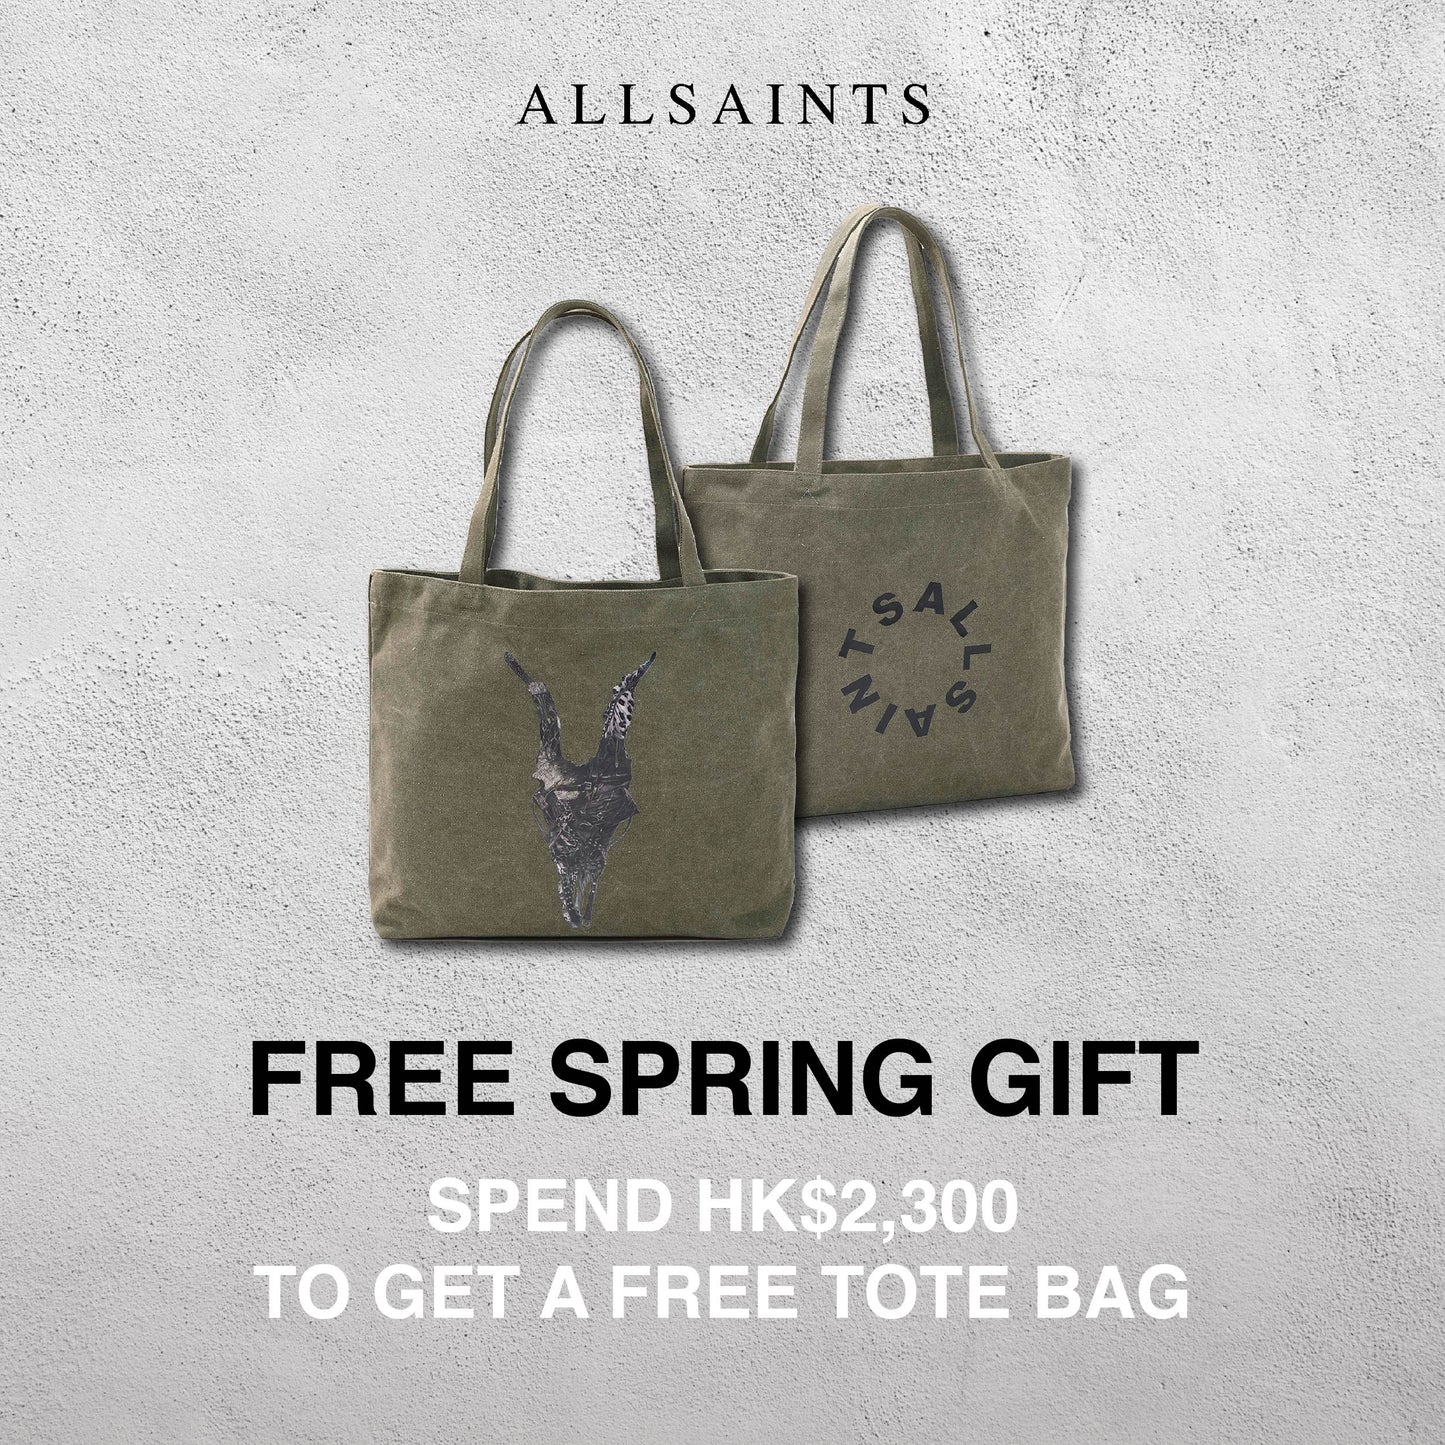 A Free Tote Bag upon a net purchase of HK$2,300